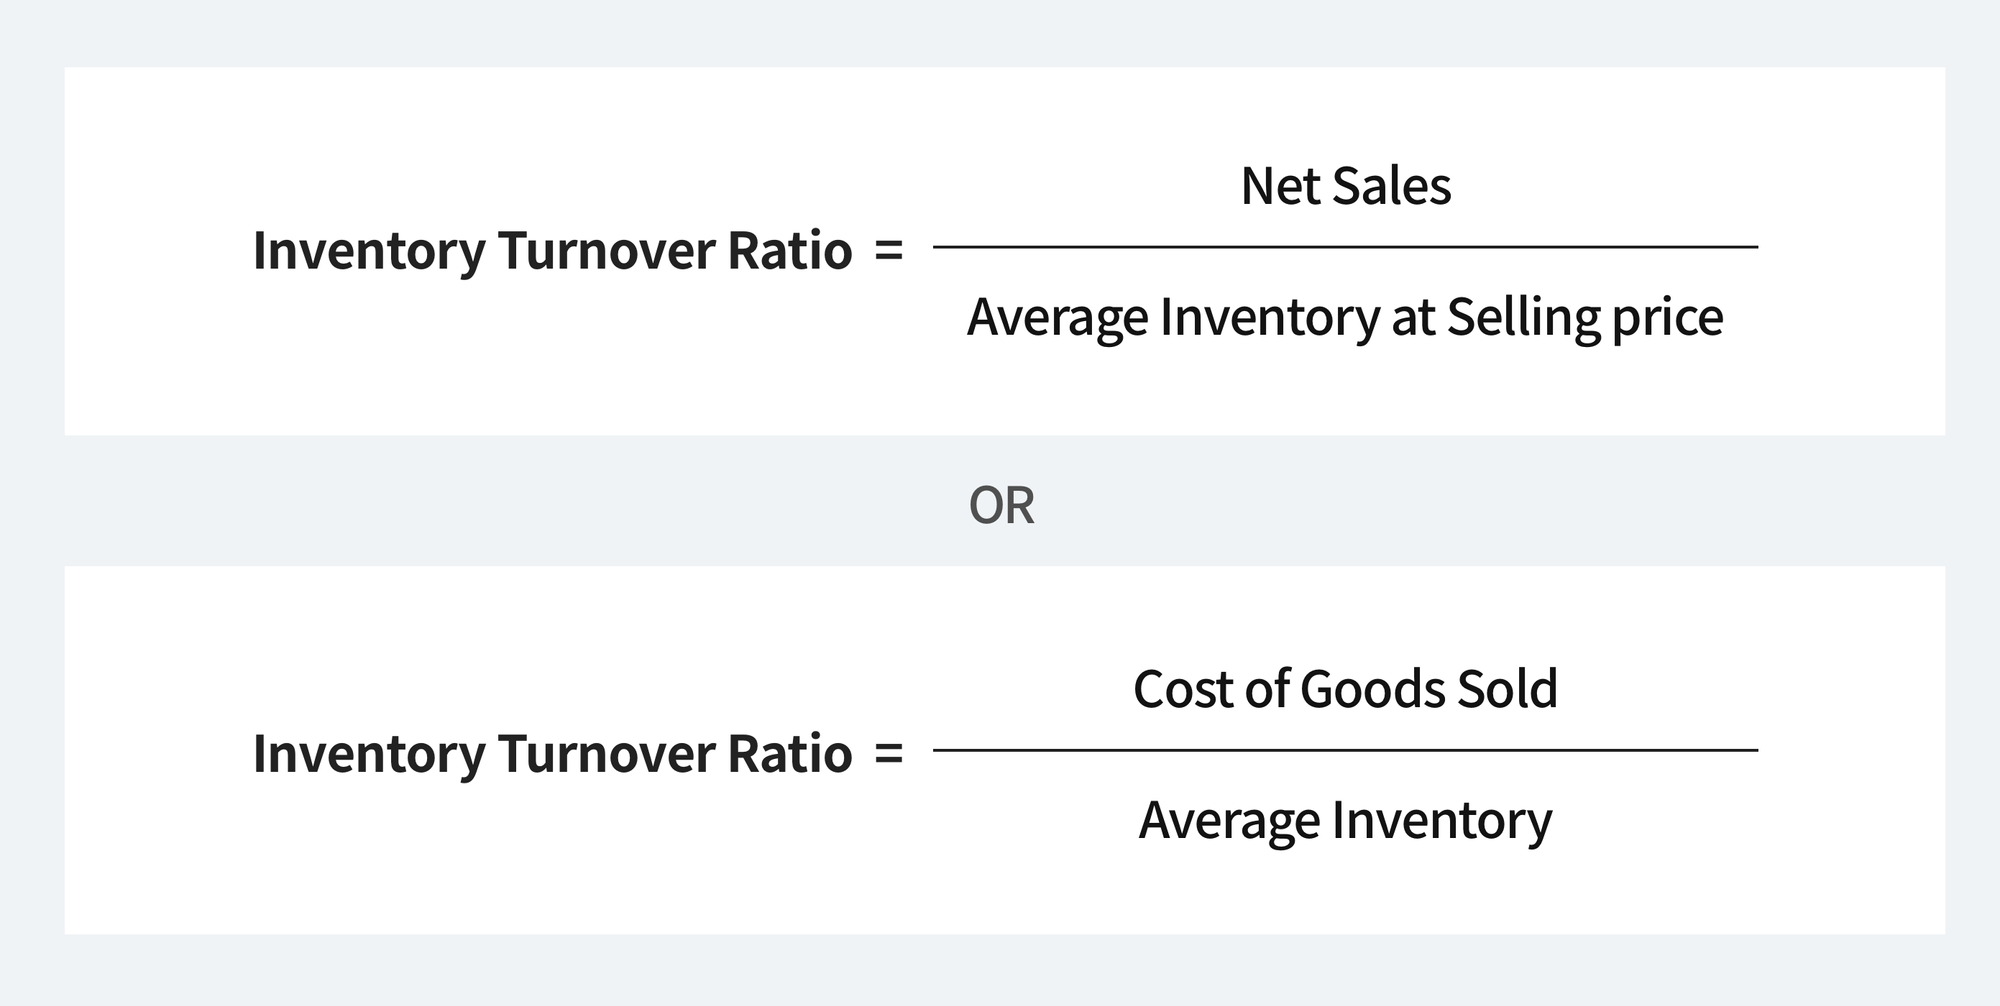 IT Ratio = Net Sales / Average Inventory Or IT Ratio= COGS / Average Inventory